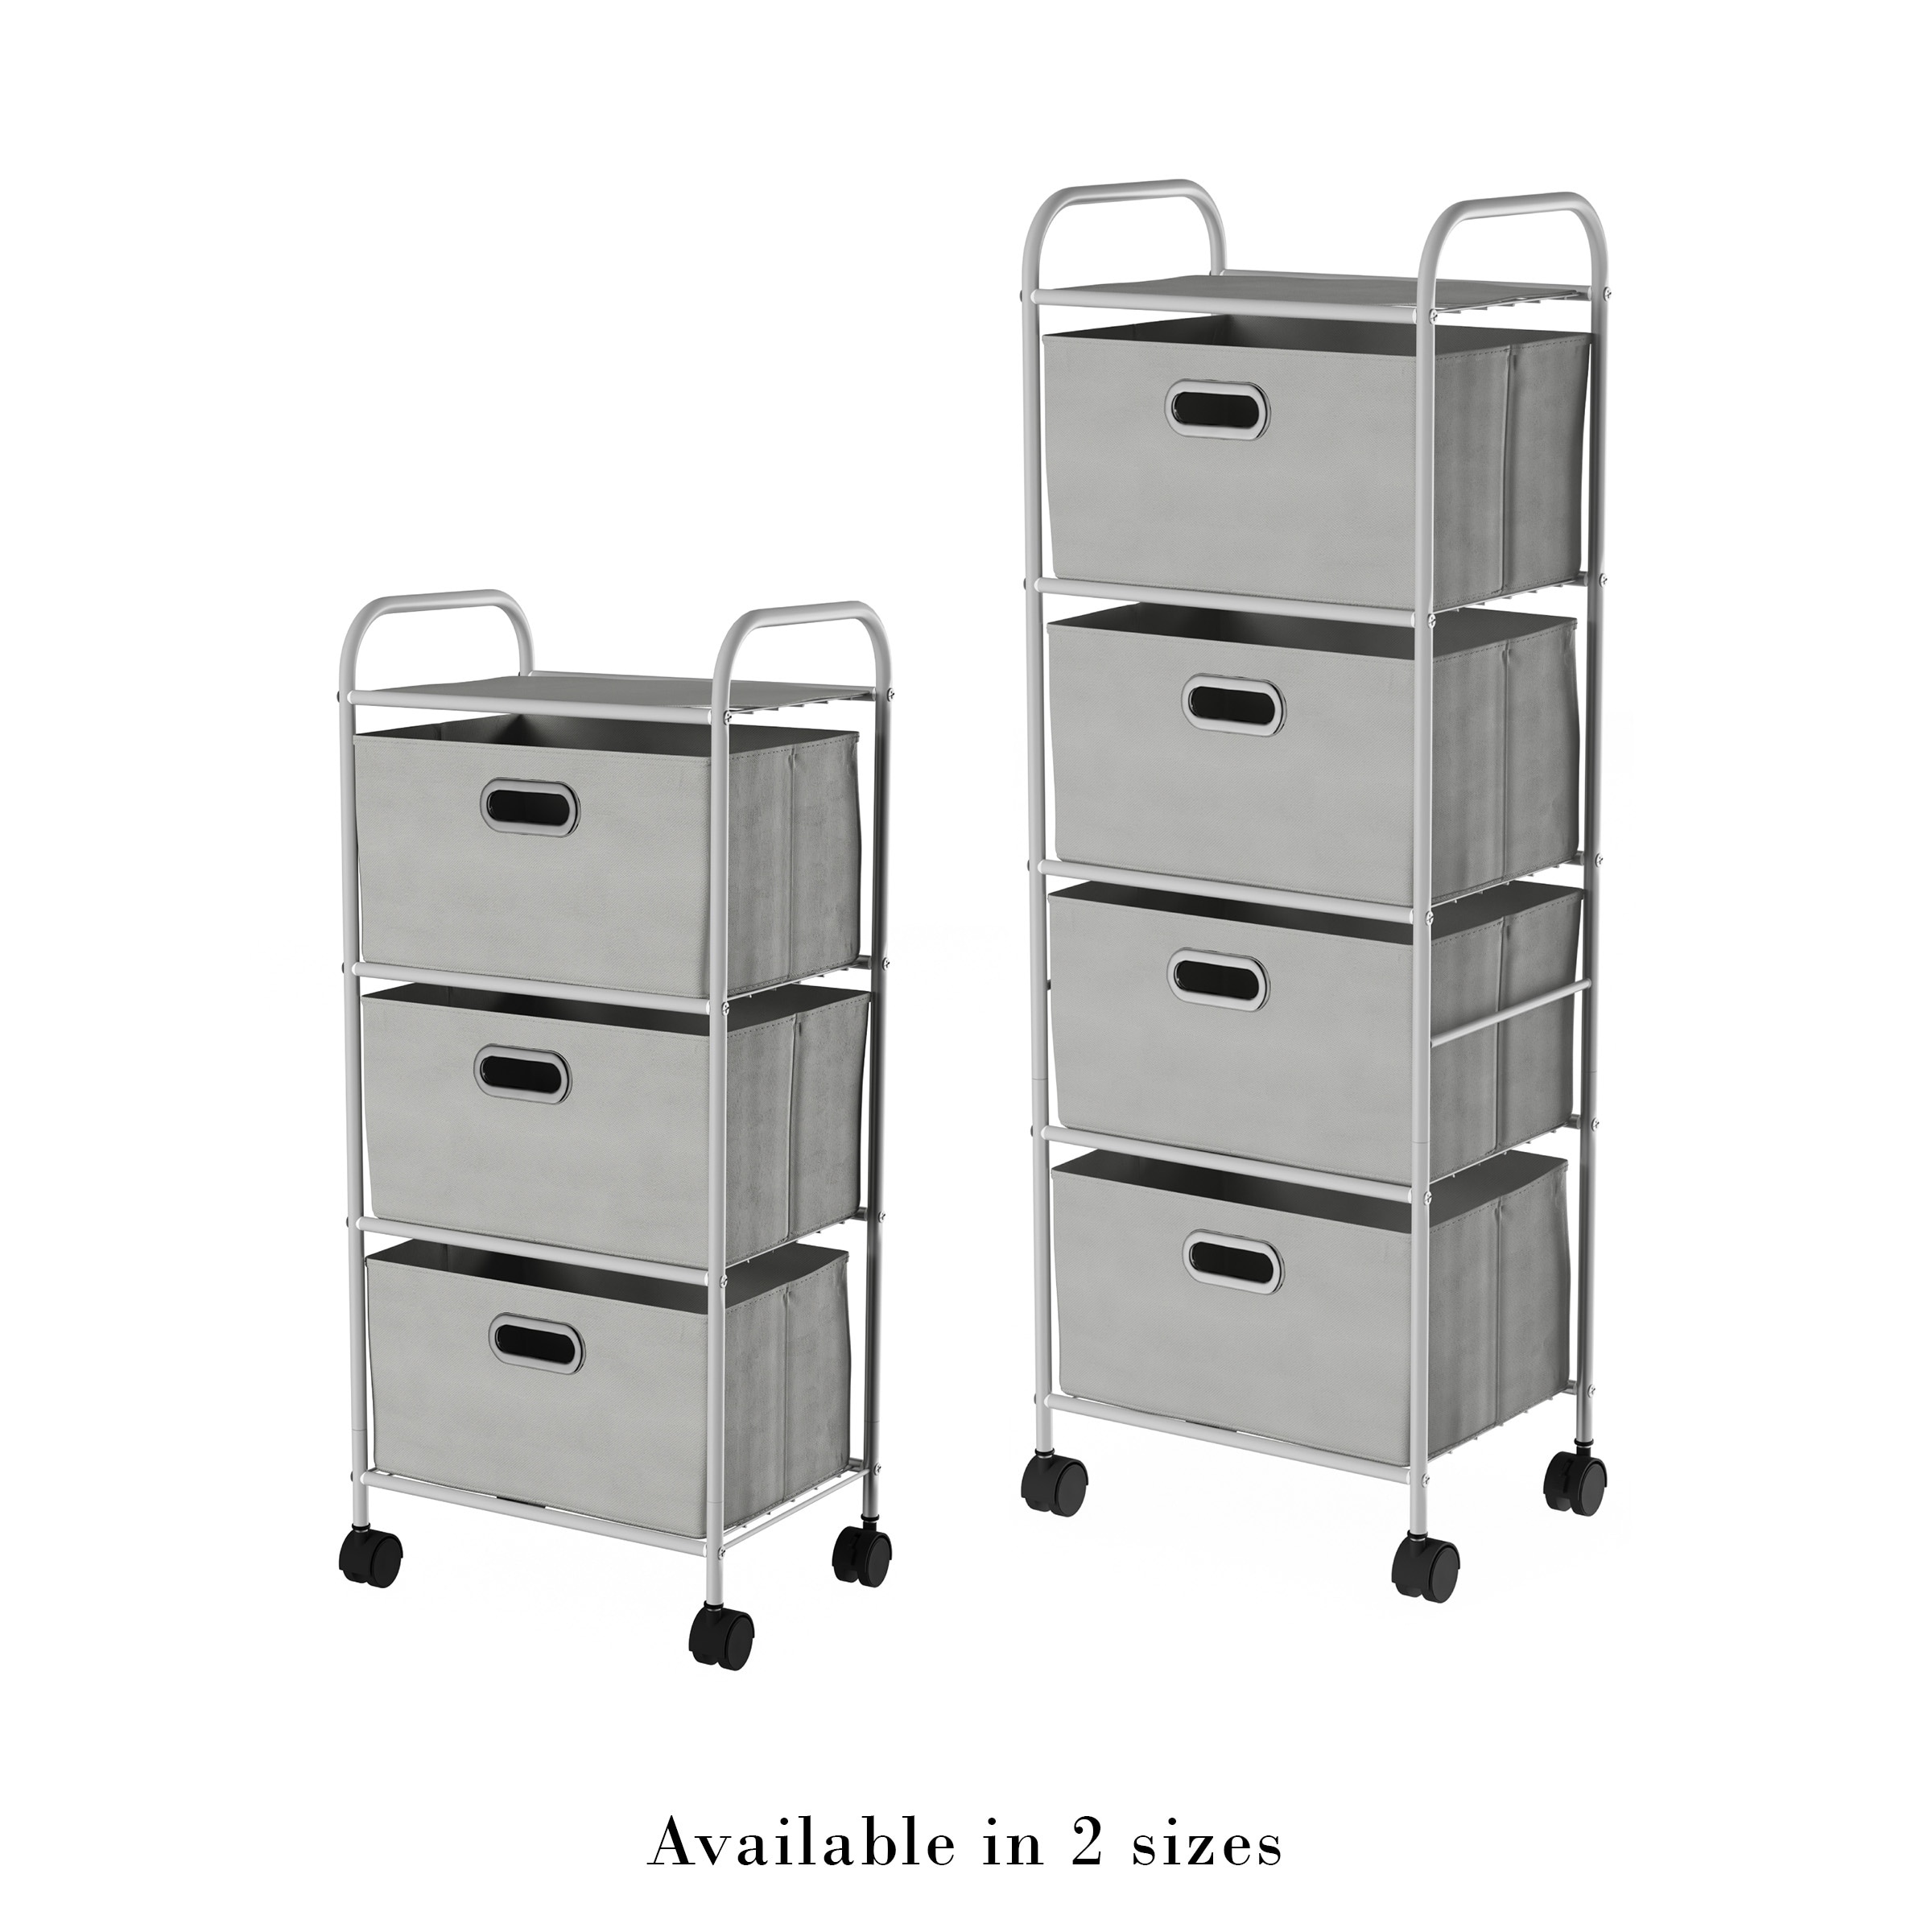 https://ak1.ostkcdn.com/images/products/28002685/Rolling-Storage-Cart-on-Wheels-Portable-Metal-Storage-Organizer-with-Drawers-and-Fabric-Bins-by-Lavish-Home-81128e99-edc0-4d90-aaf5-0322137e735b.jpg